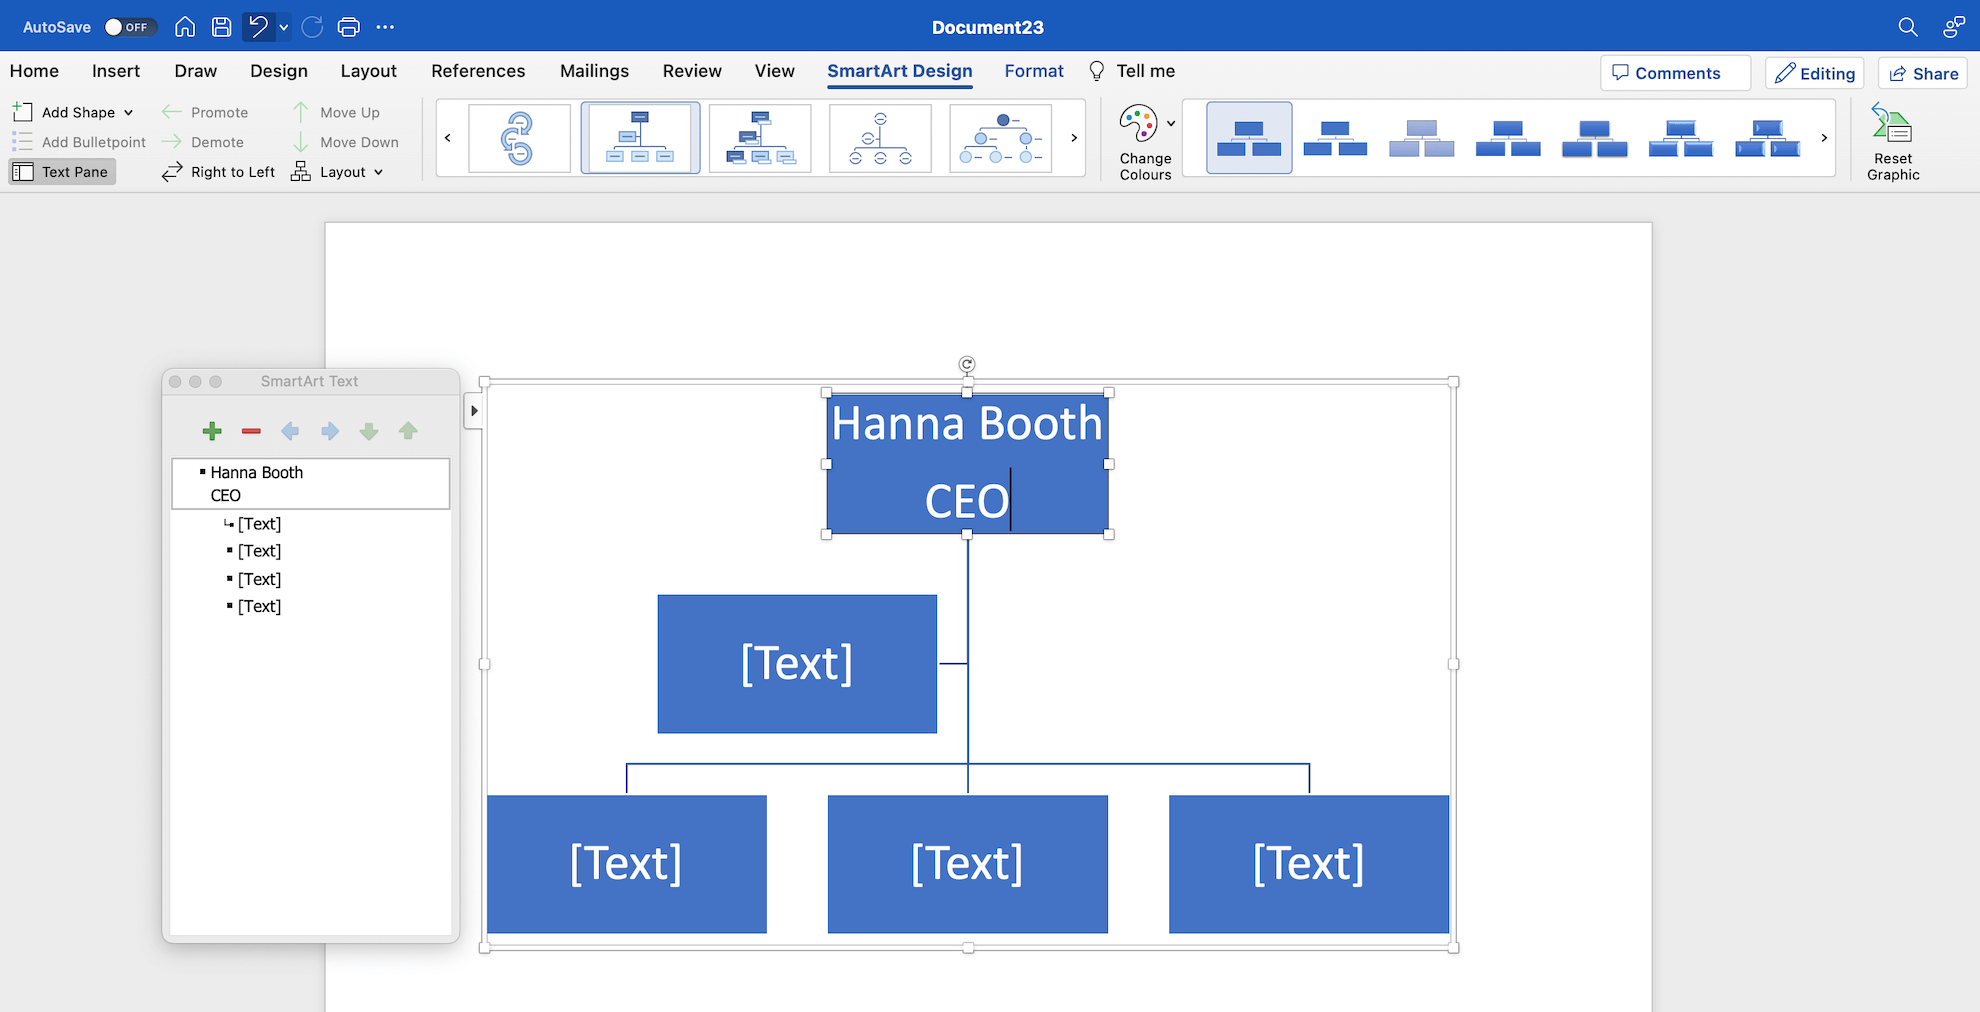 Adding employee details to org chart in Word